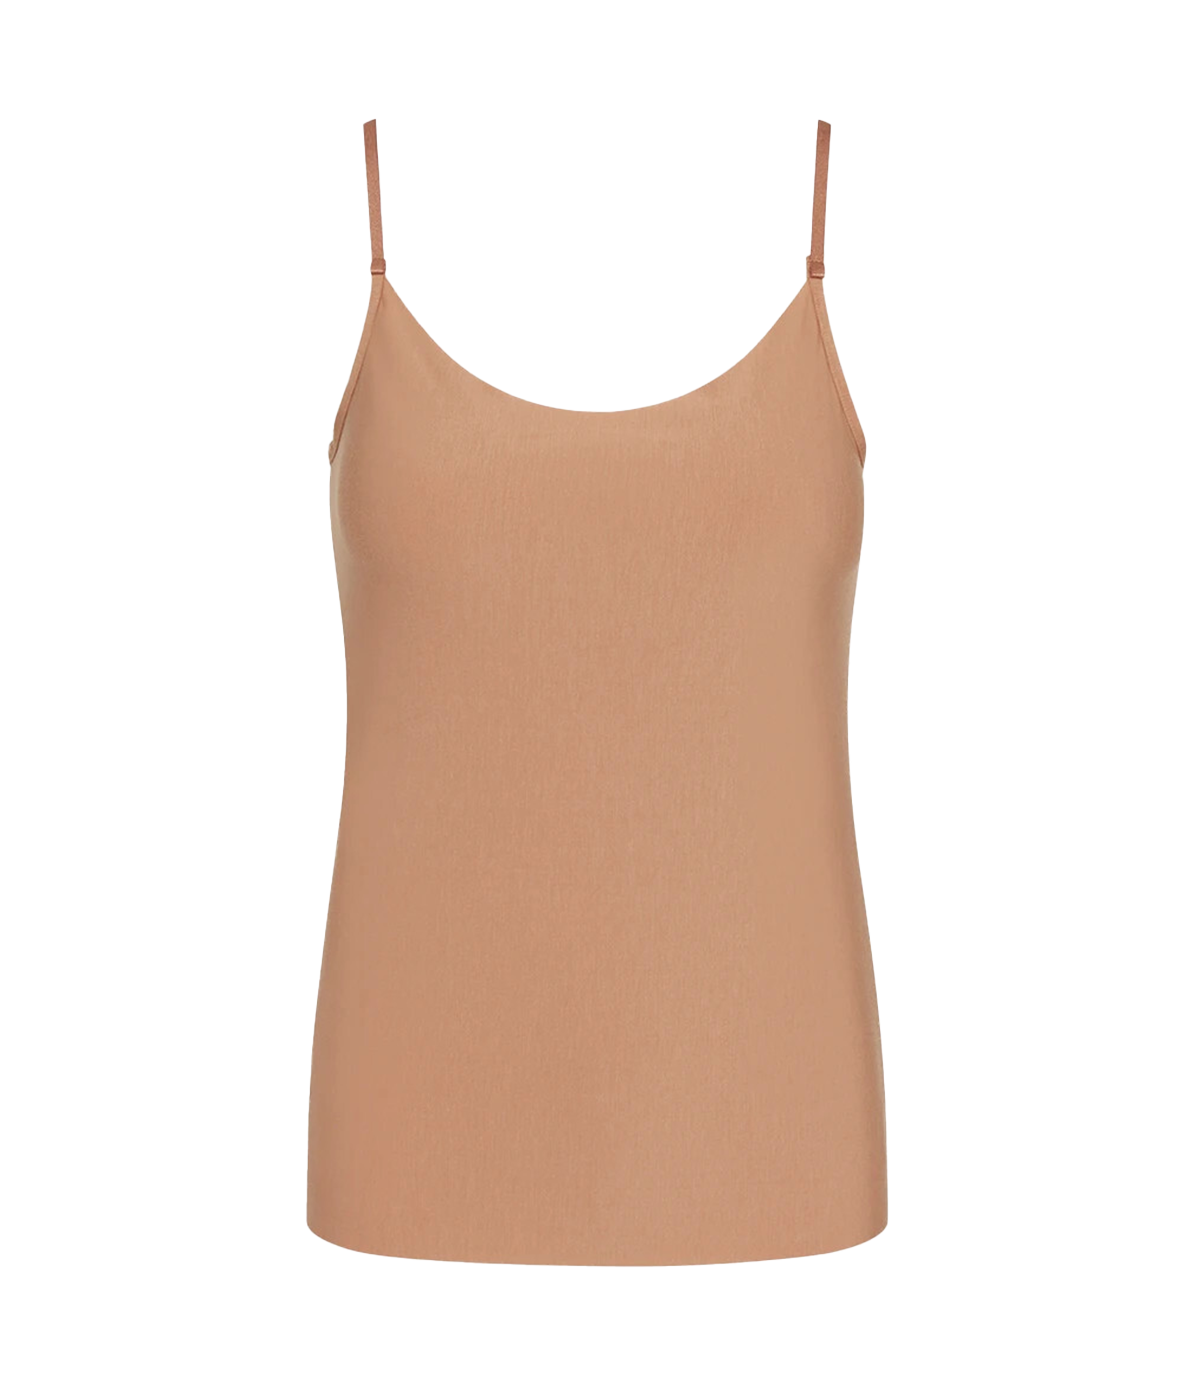 Butter Cami in Toffee